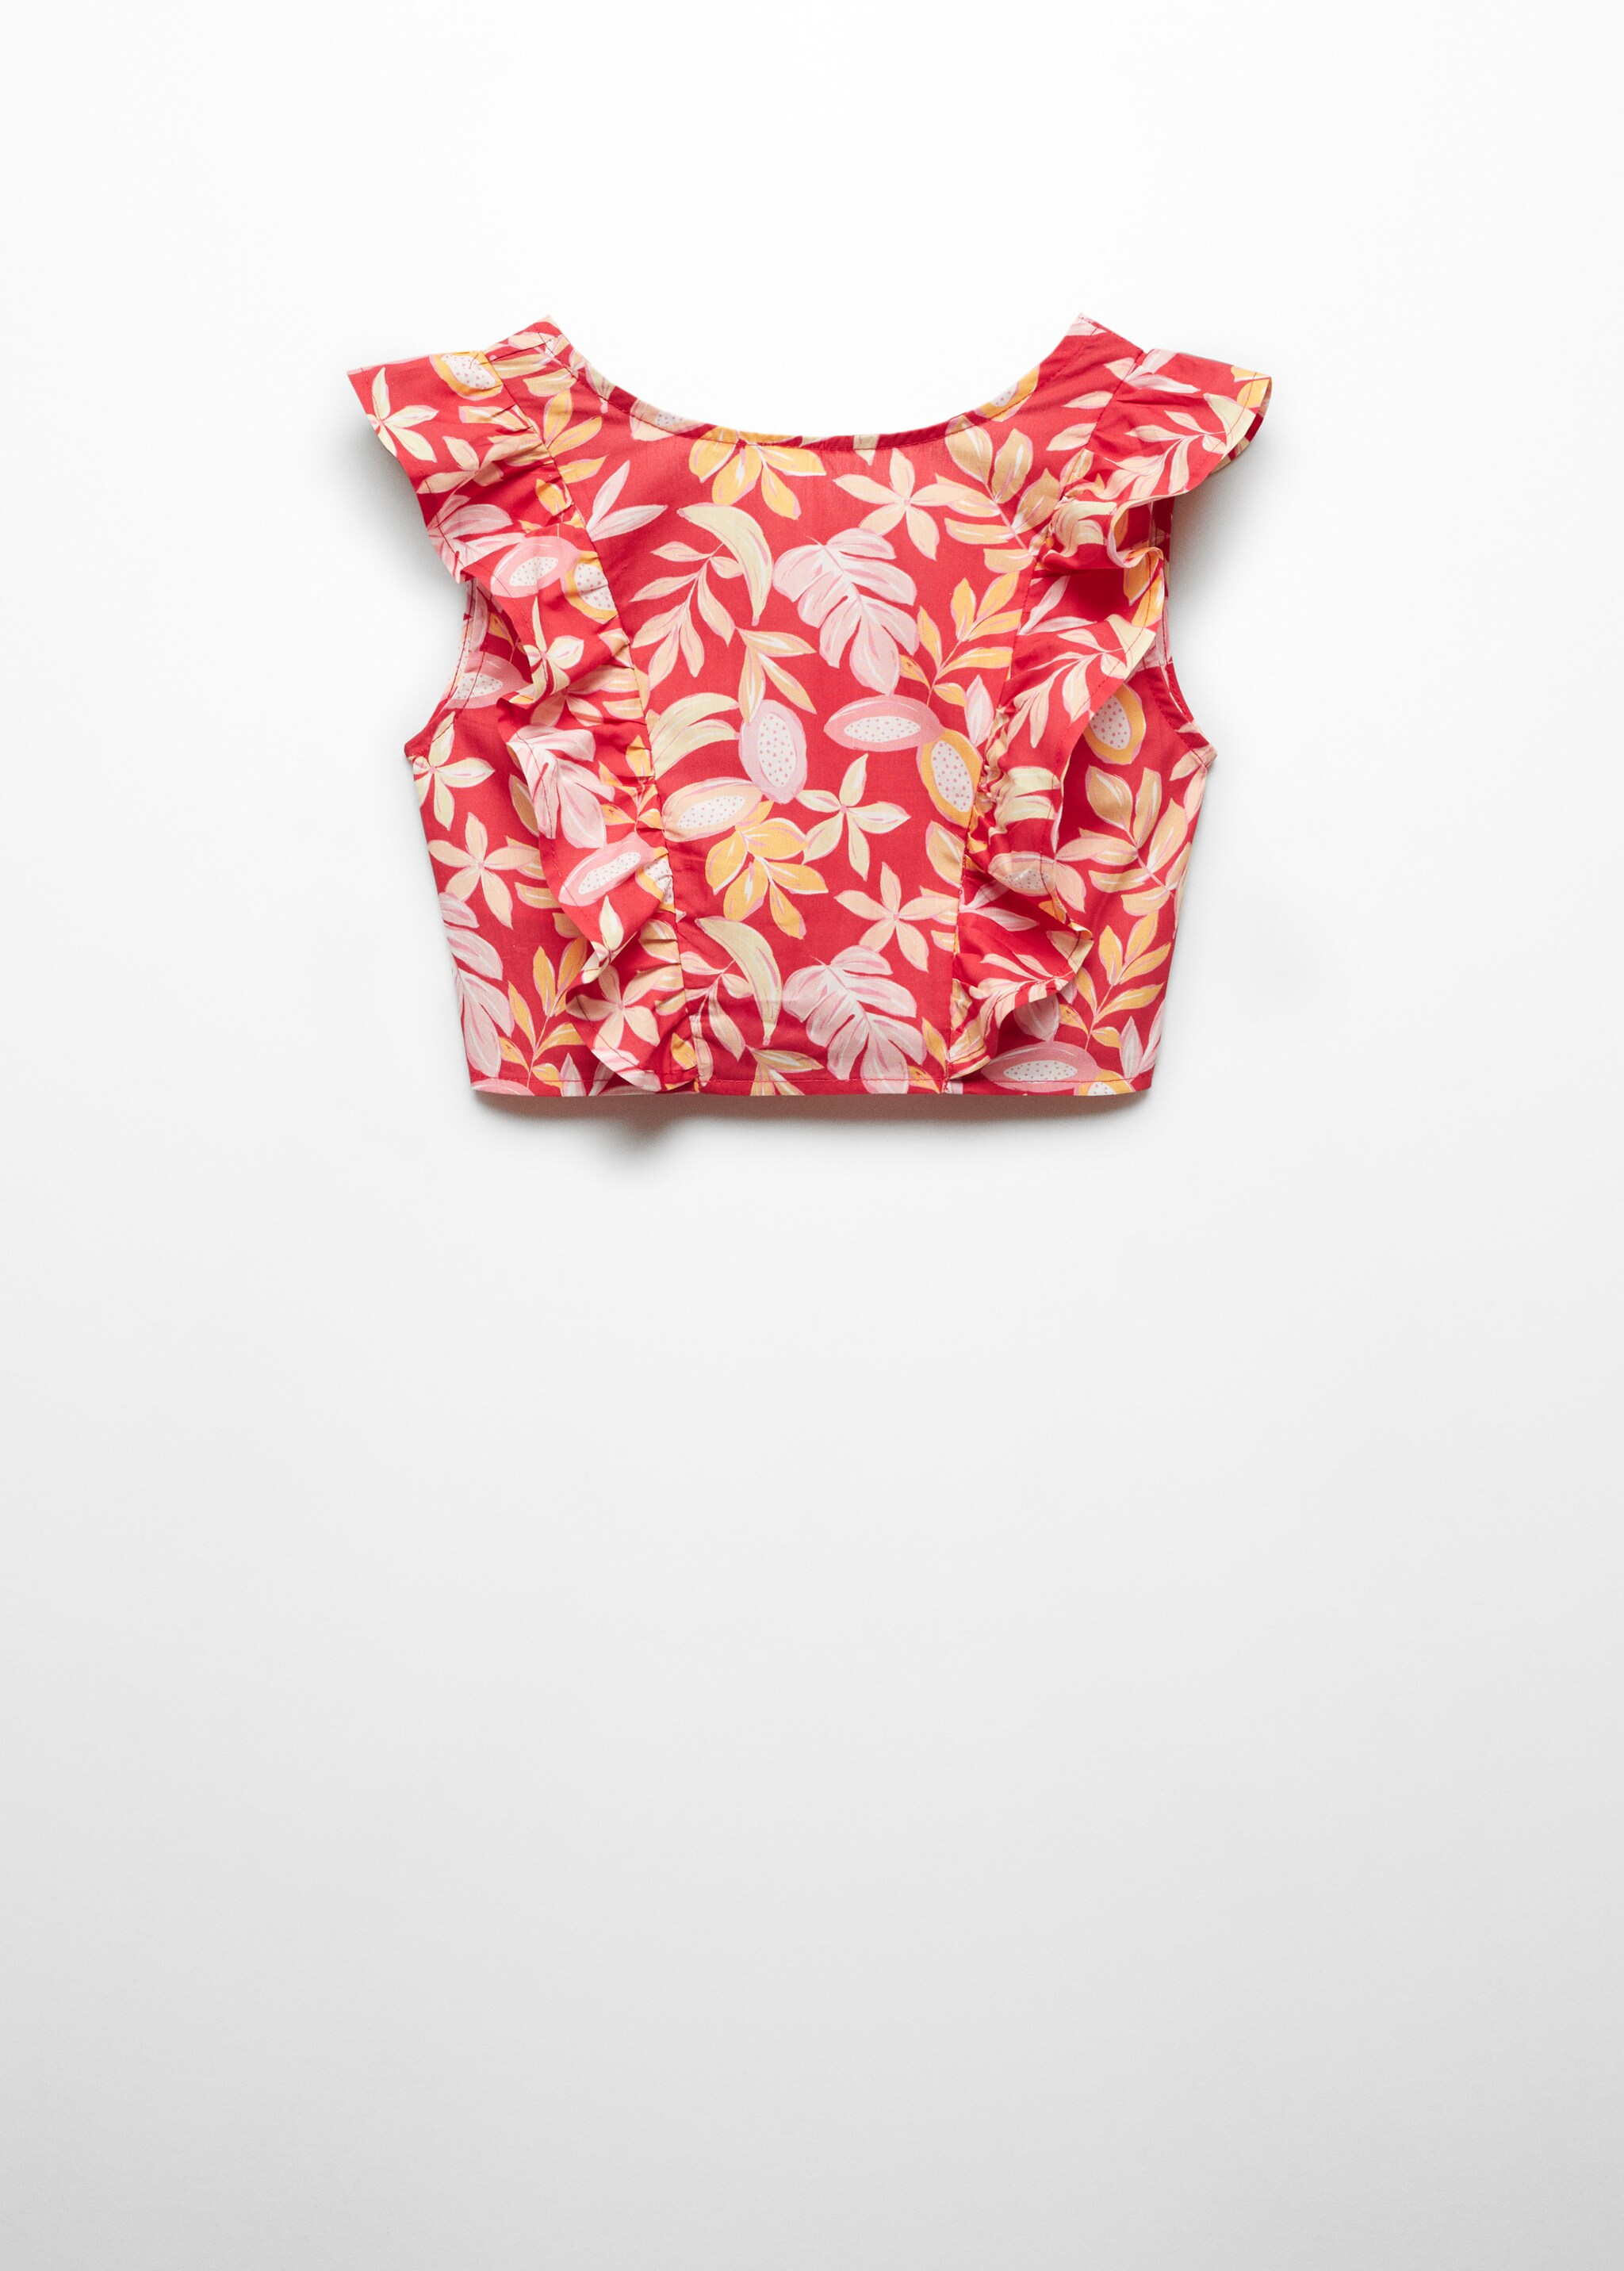 Ruffle printed top - Article without model